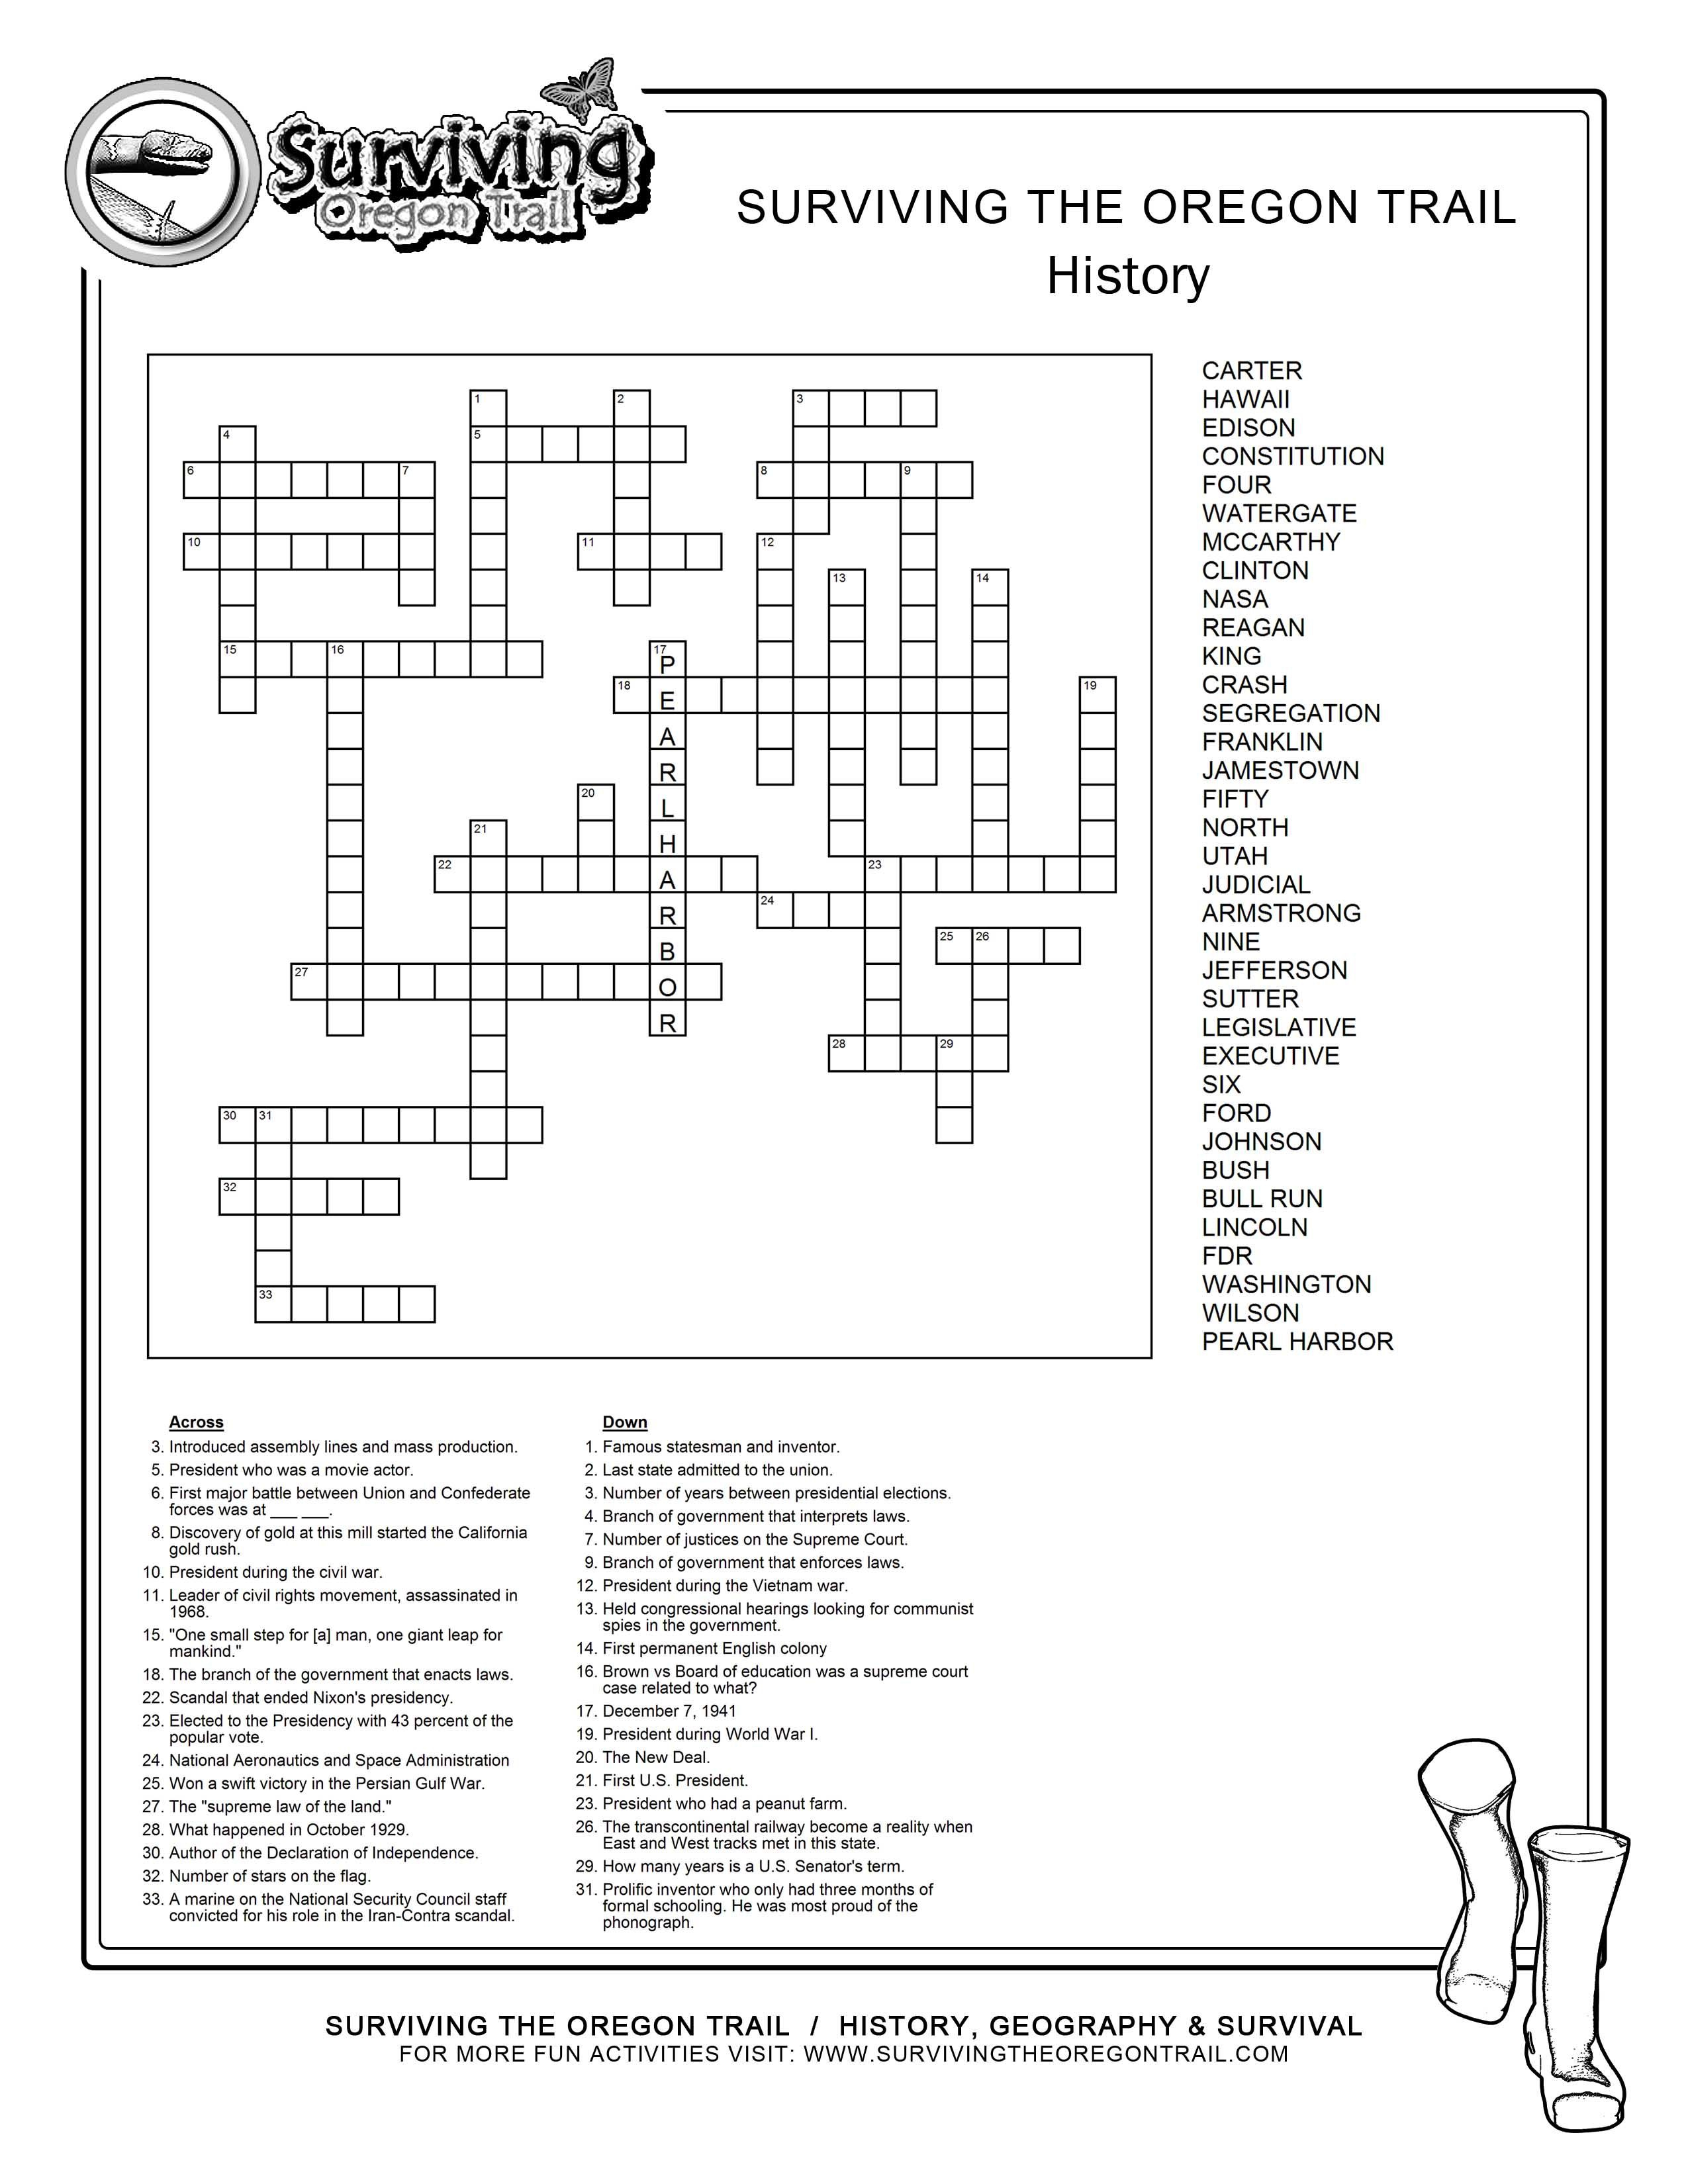 Fill Free To Save This Historical Crossword Puzzle To Your Computer - Printable Crossword Puzzles Spanish